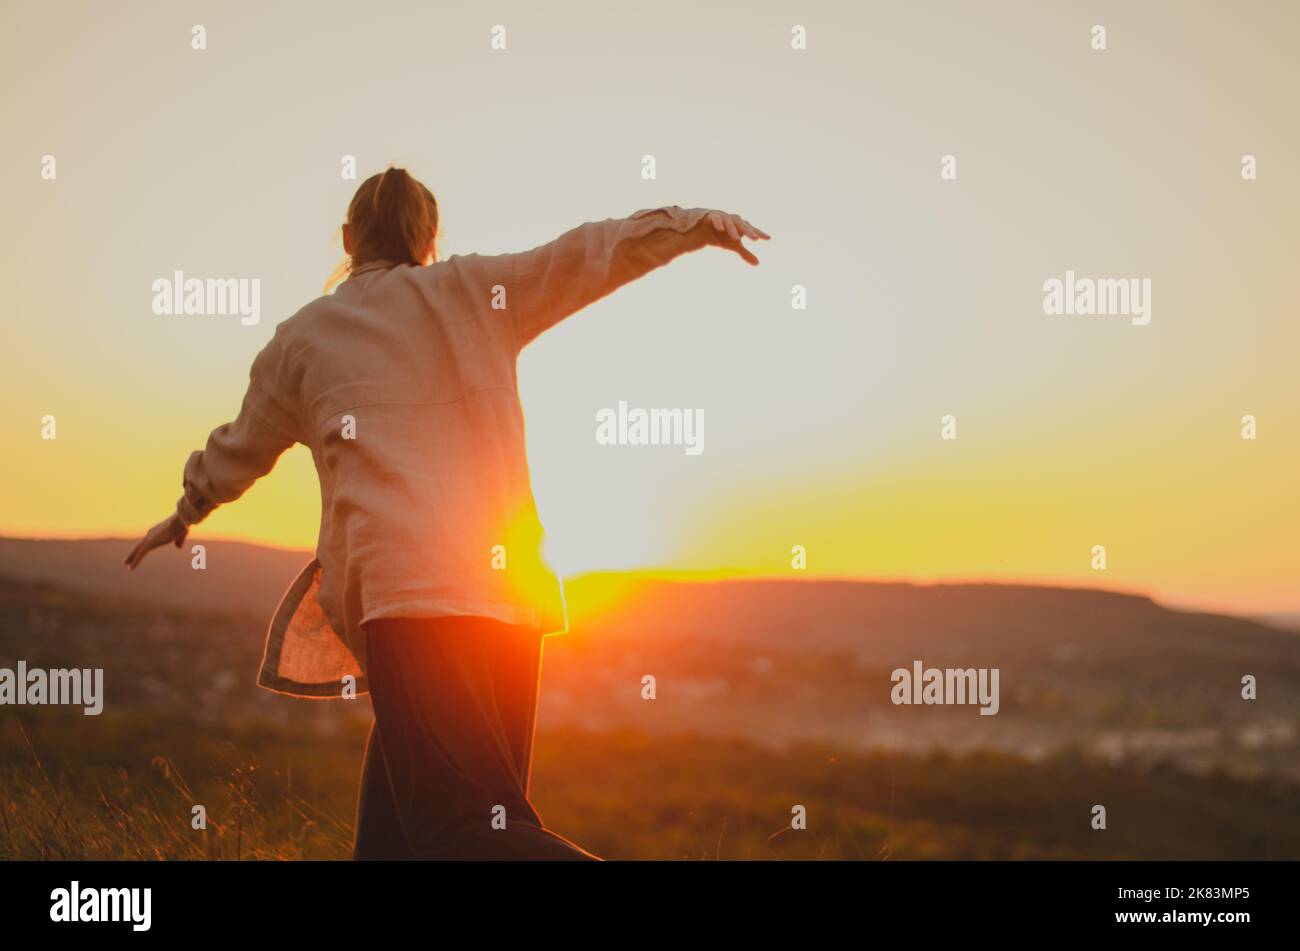 Woman doing intuitive movement on hill at sunset Stock Photo